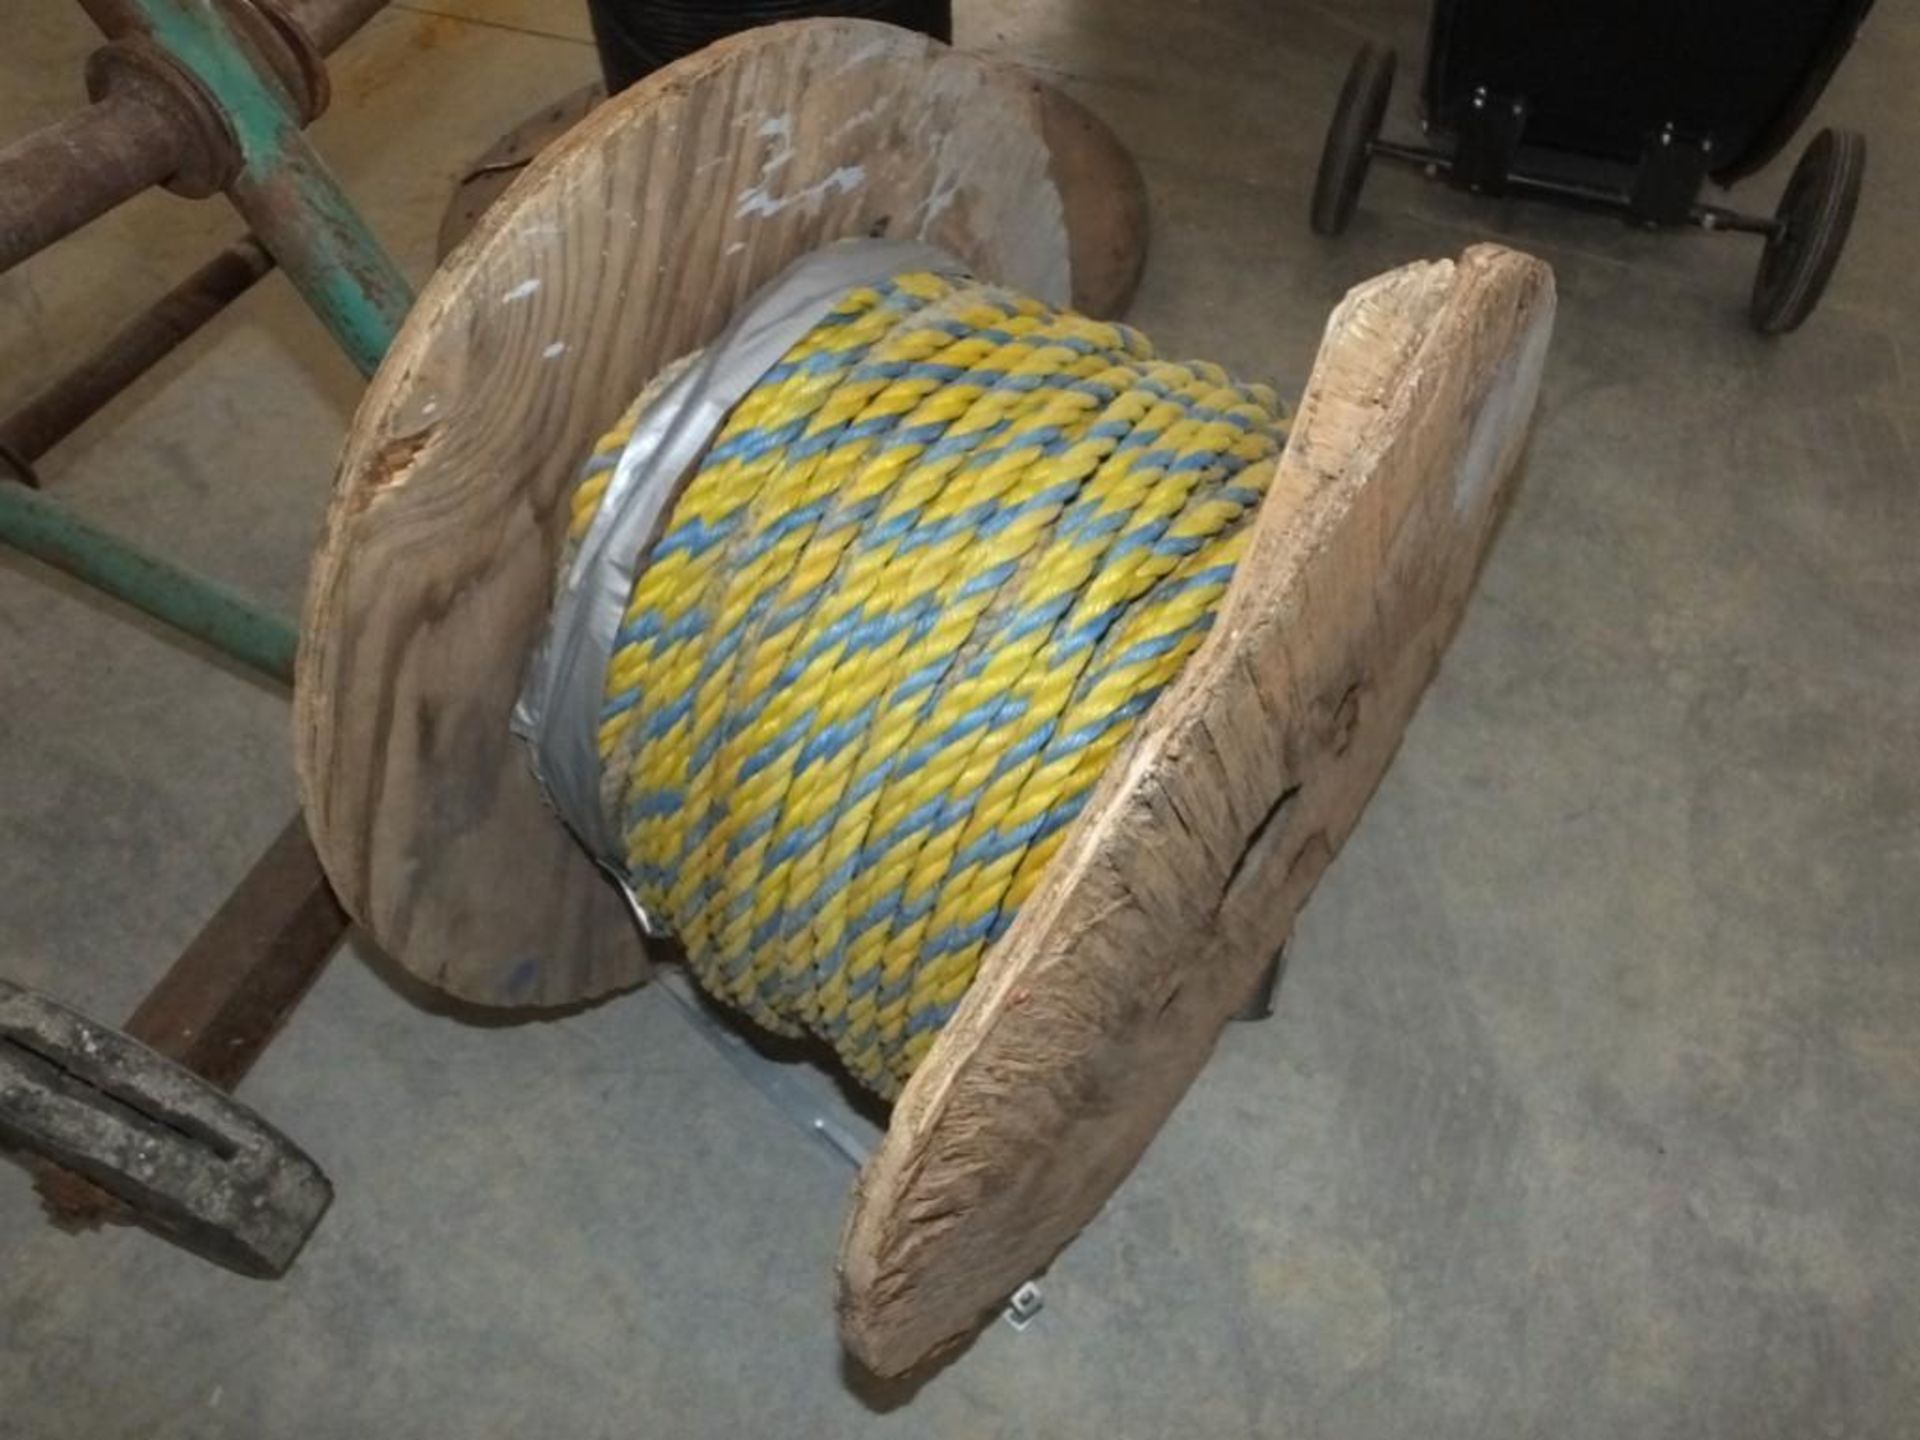 Greenlee Wire Cart and Spool Haul Rope - Image 3 of 3